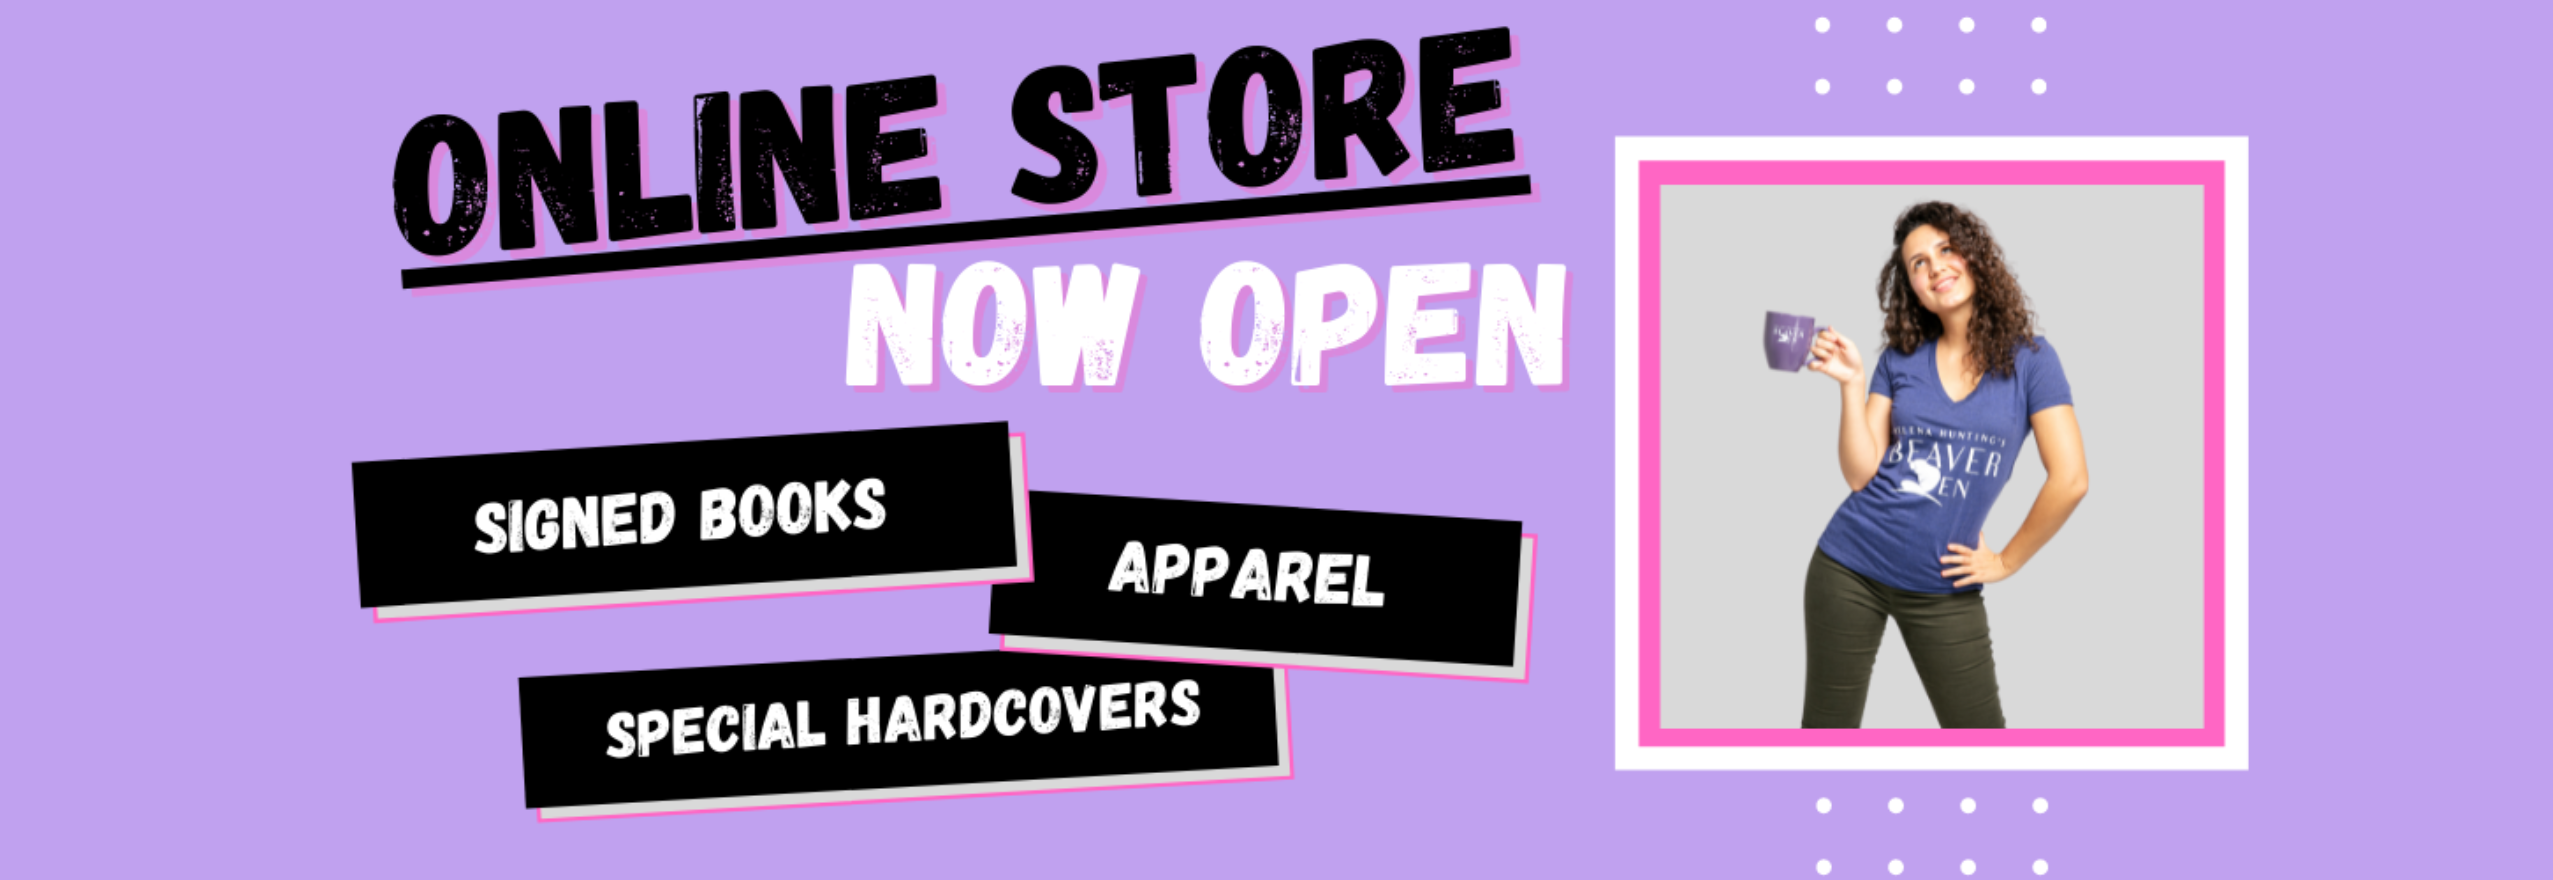 HH Store Live Banner (1500 x 500 px)